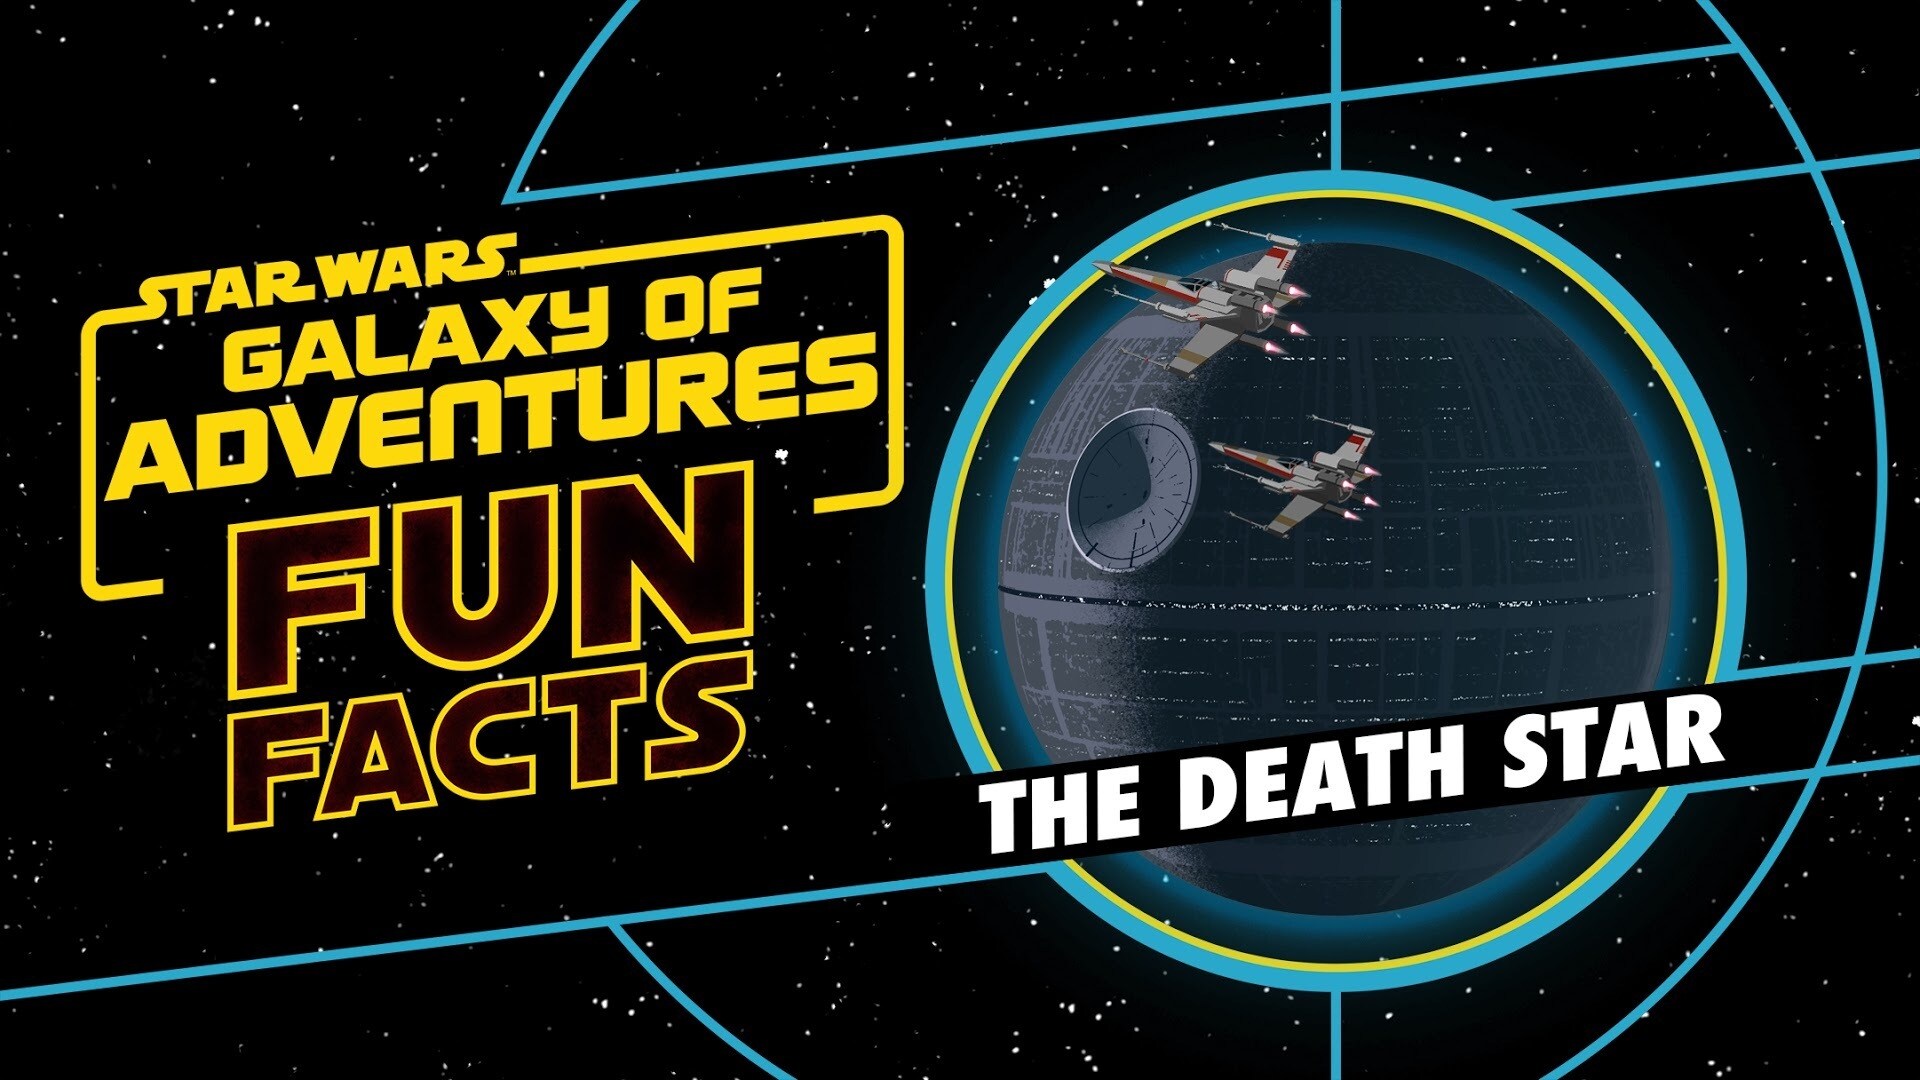 The Death Star | Star Wars Galaxy of Adventures Fun Facts